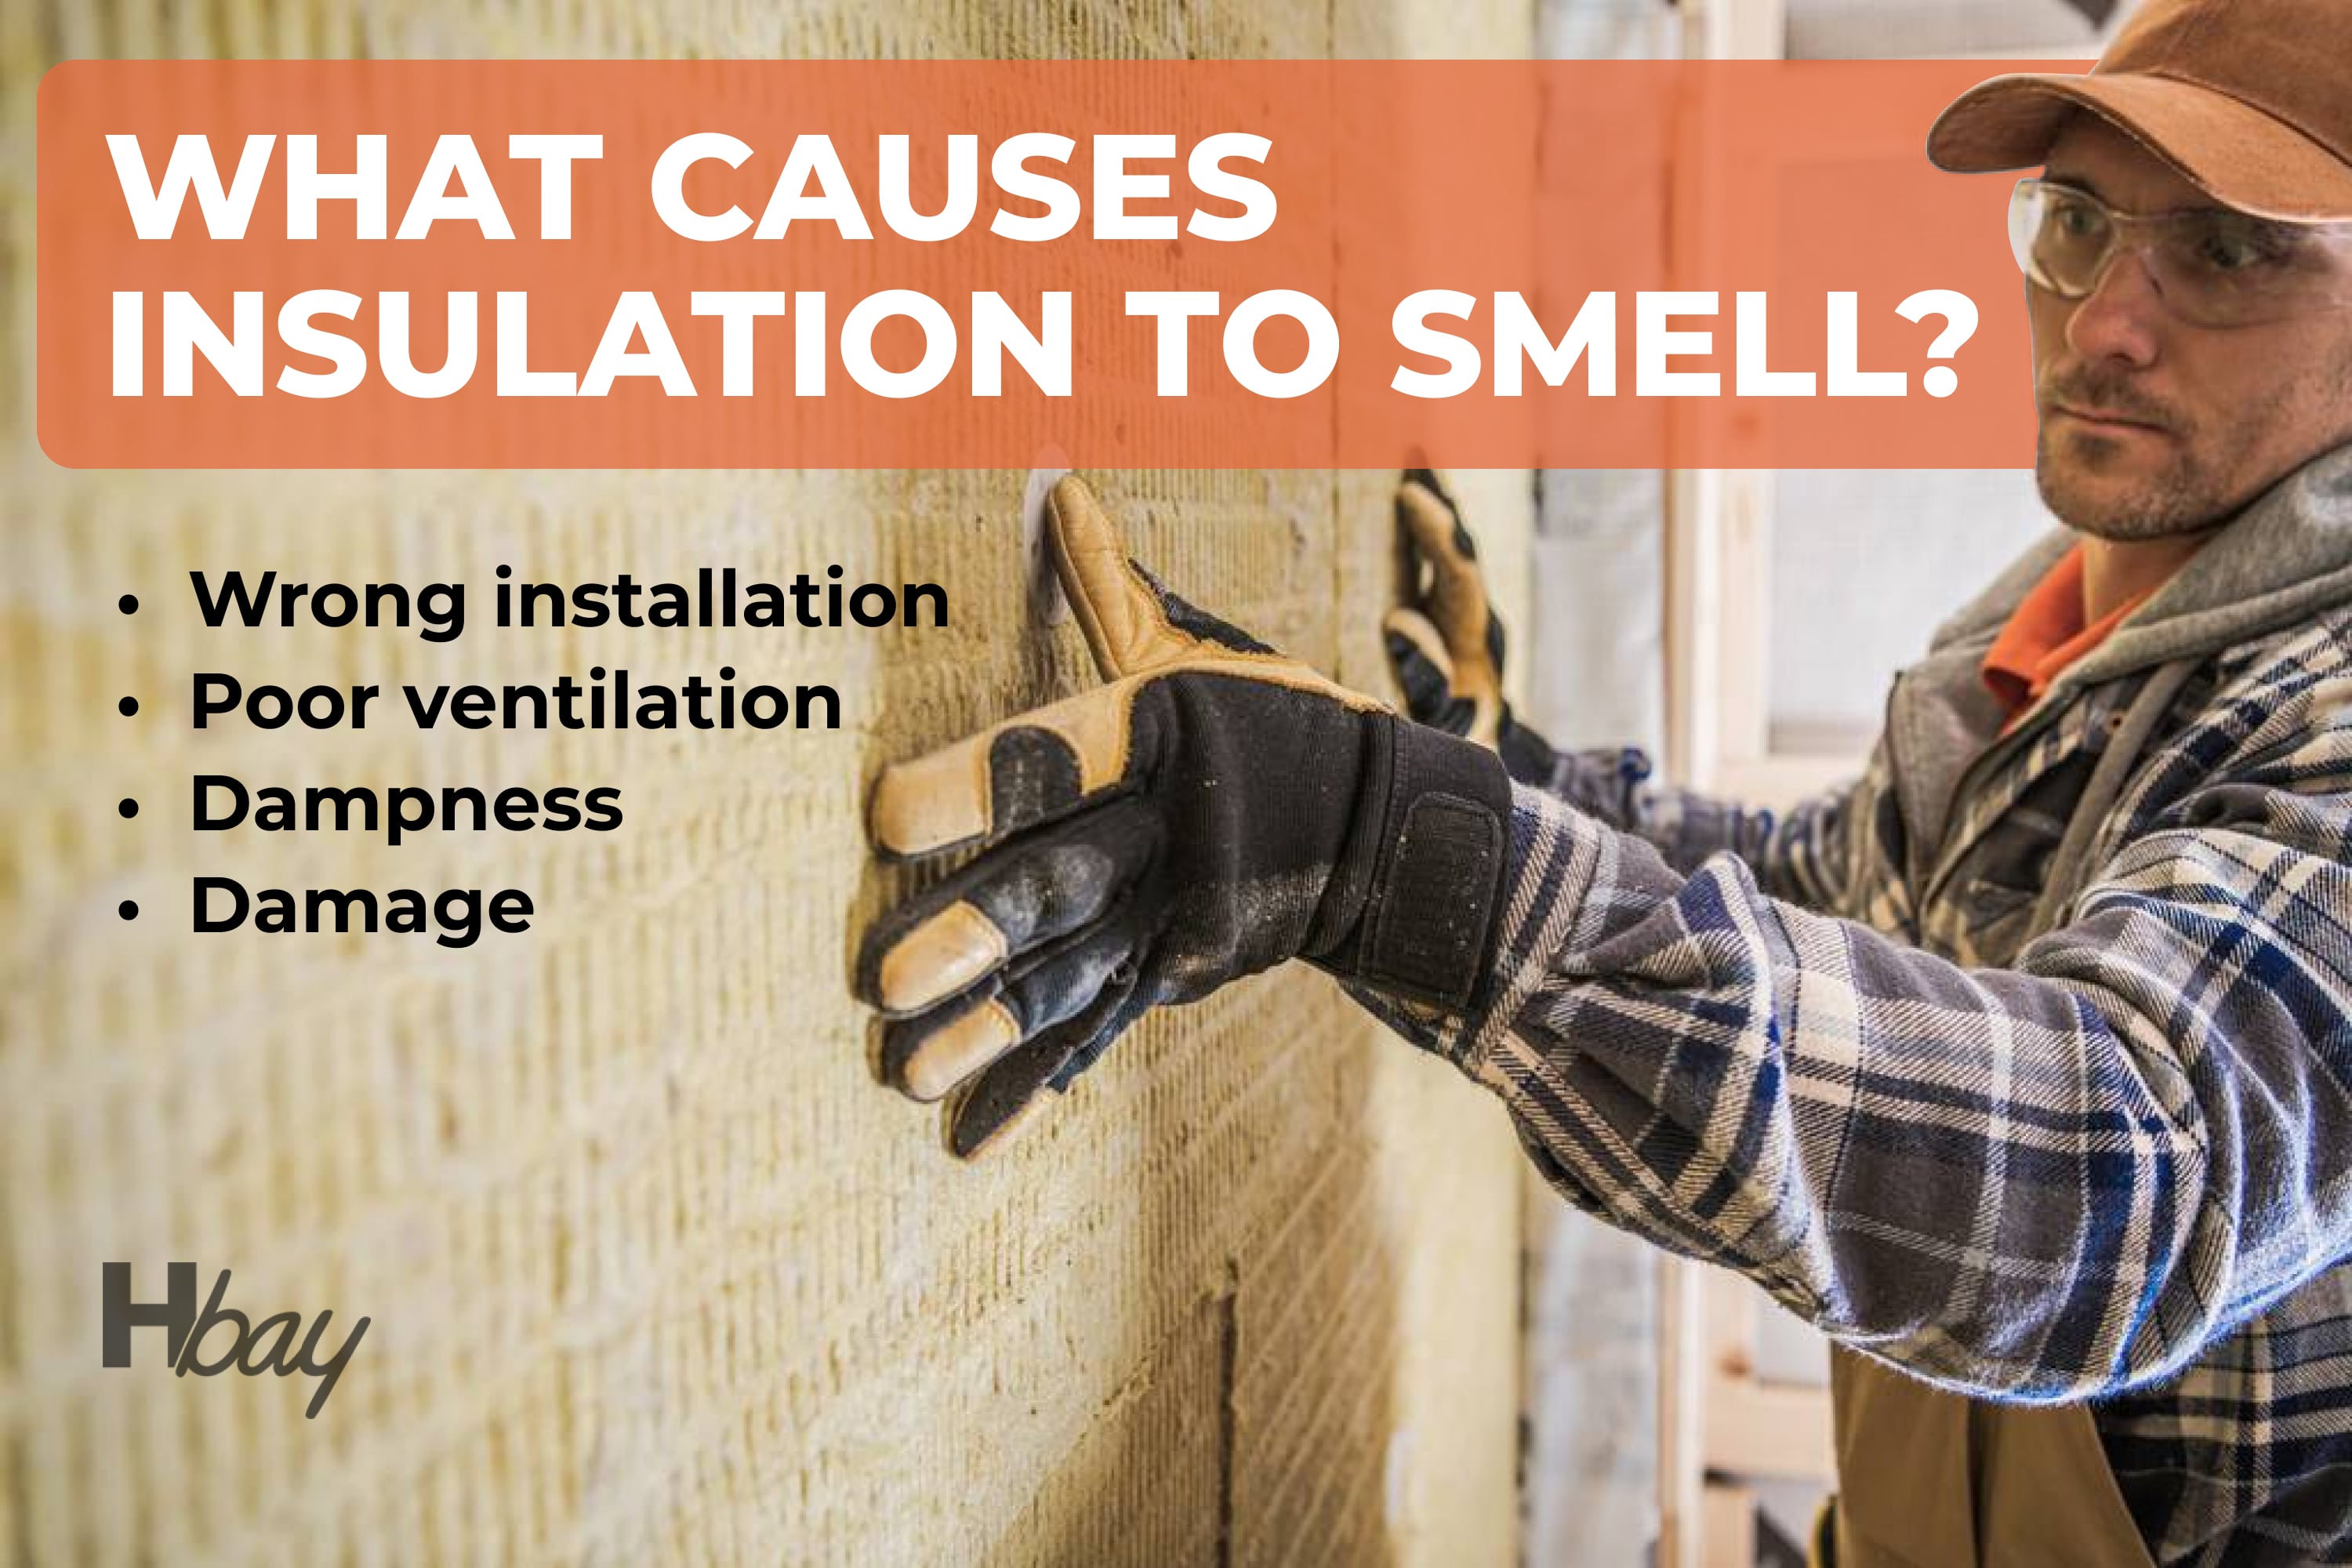 What causes insulation to smell